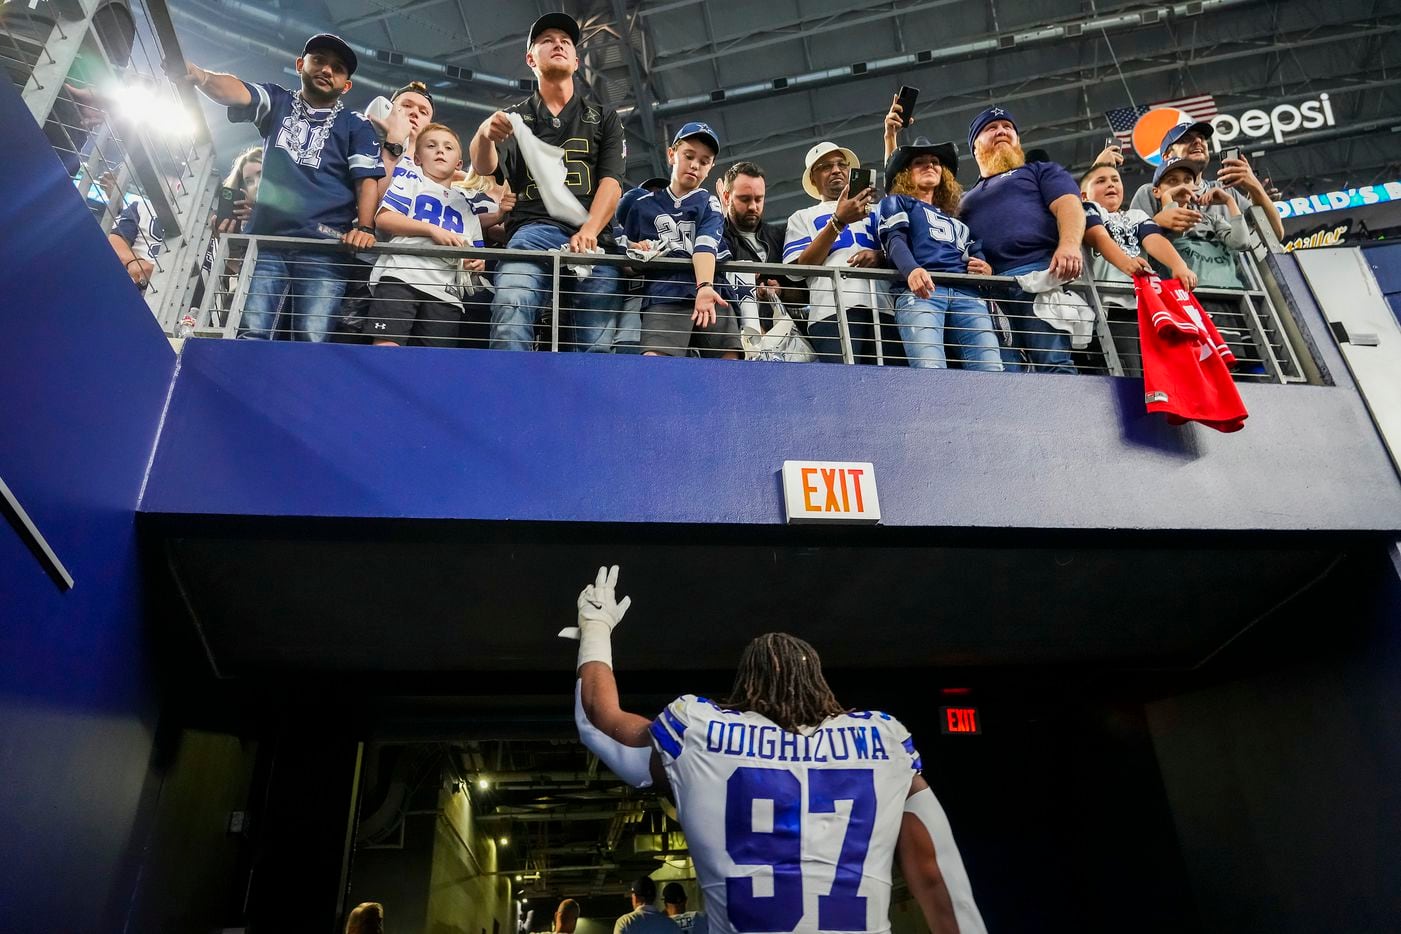 Dallas Cowboys defensive tackle Osa Odighizuwa waves to fans as he leaves the field following a victory over the Washington Football Team in an NFL football game at AT&T Stadium on Sunday, Dec. 26, 2021, in Arlington. The Cowboys won the game 56-14.